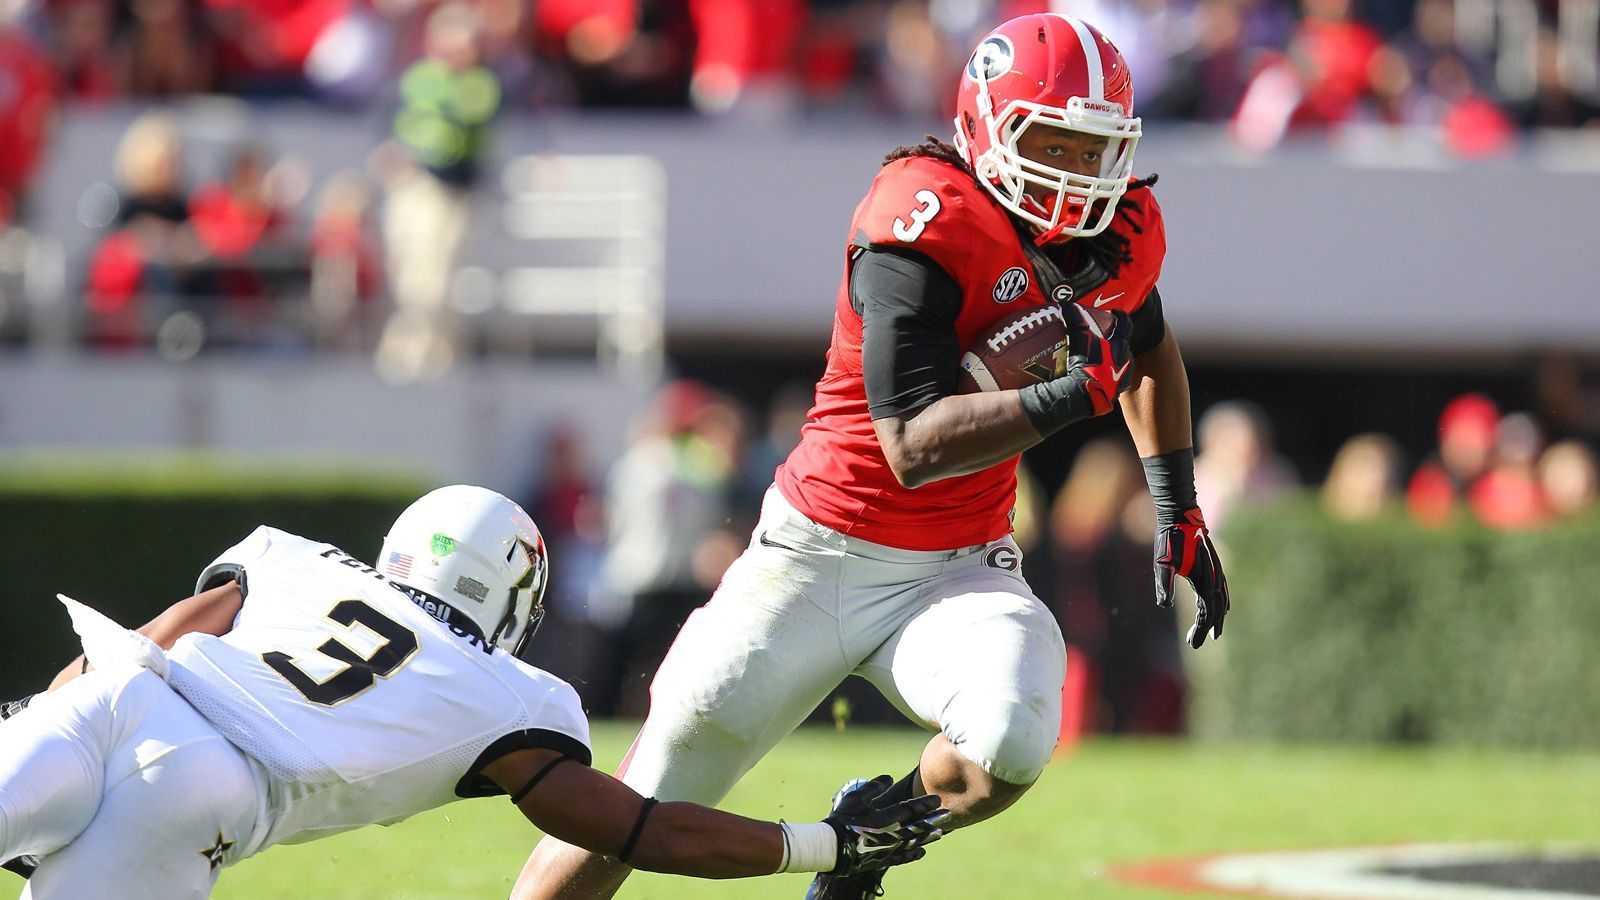 
                <strong>Todd Gurley (Los Angeles Rams)</strong><br>
                College: Georgia BulldogsPosition: Running BackJahre am College: 3College-Stats: 3285 Rushing Yards - 36 Rushing Touchdowns - 6,4 Yards/LaufGedrafted: 2015 an 10. Stelle von den St. Louis Rams
              